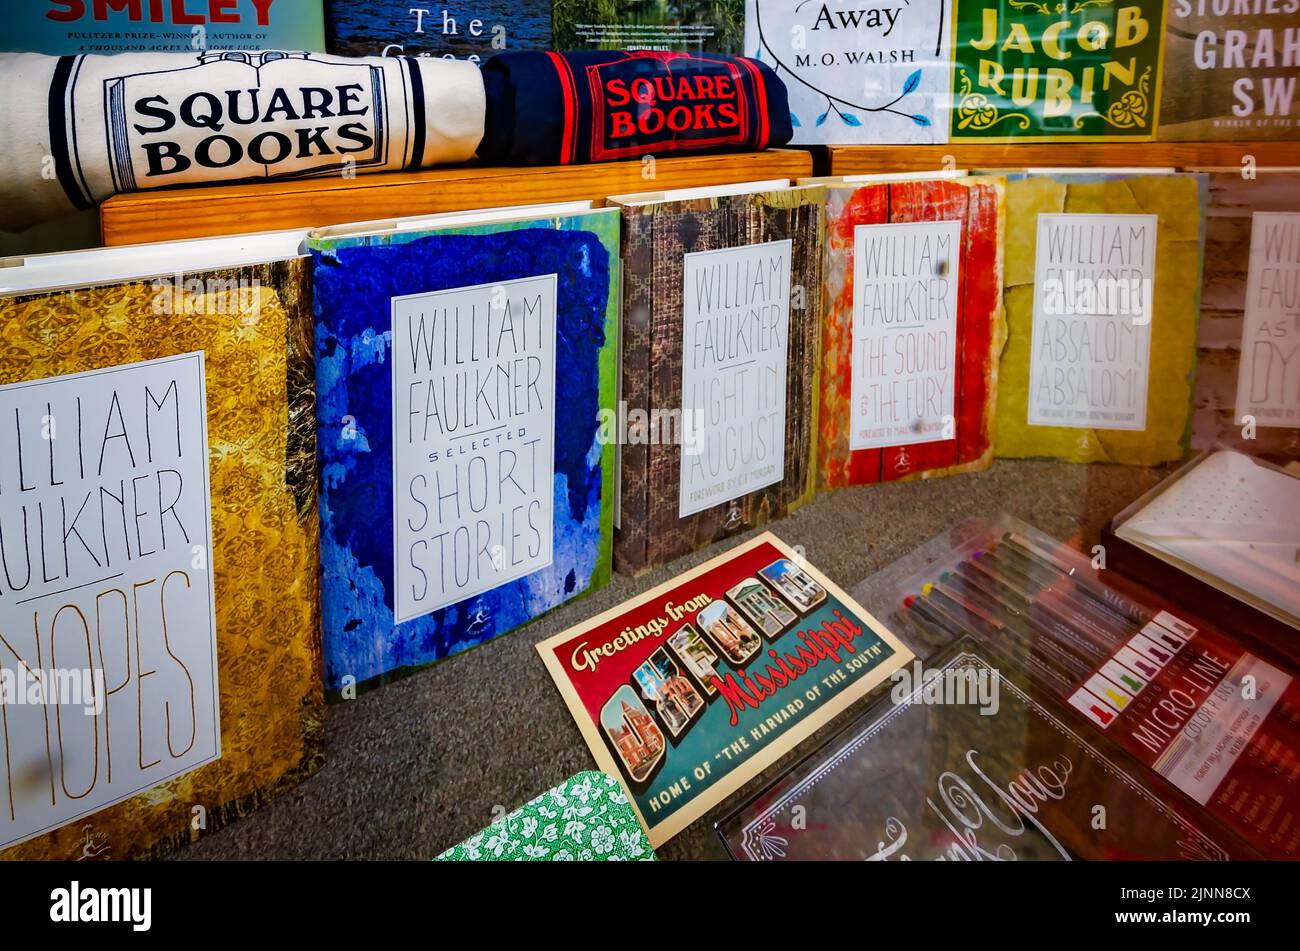 Books by William Faulkner and other Southern authors are displayed in the window at Square Books, May 31, 2015, in Oxford, Mississippi. Stock Photo